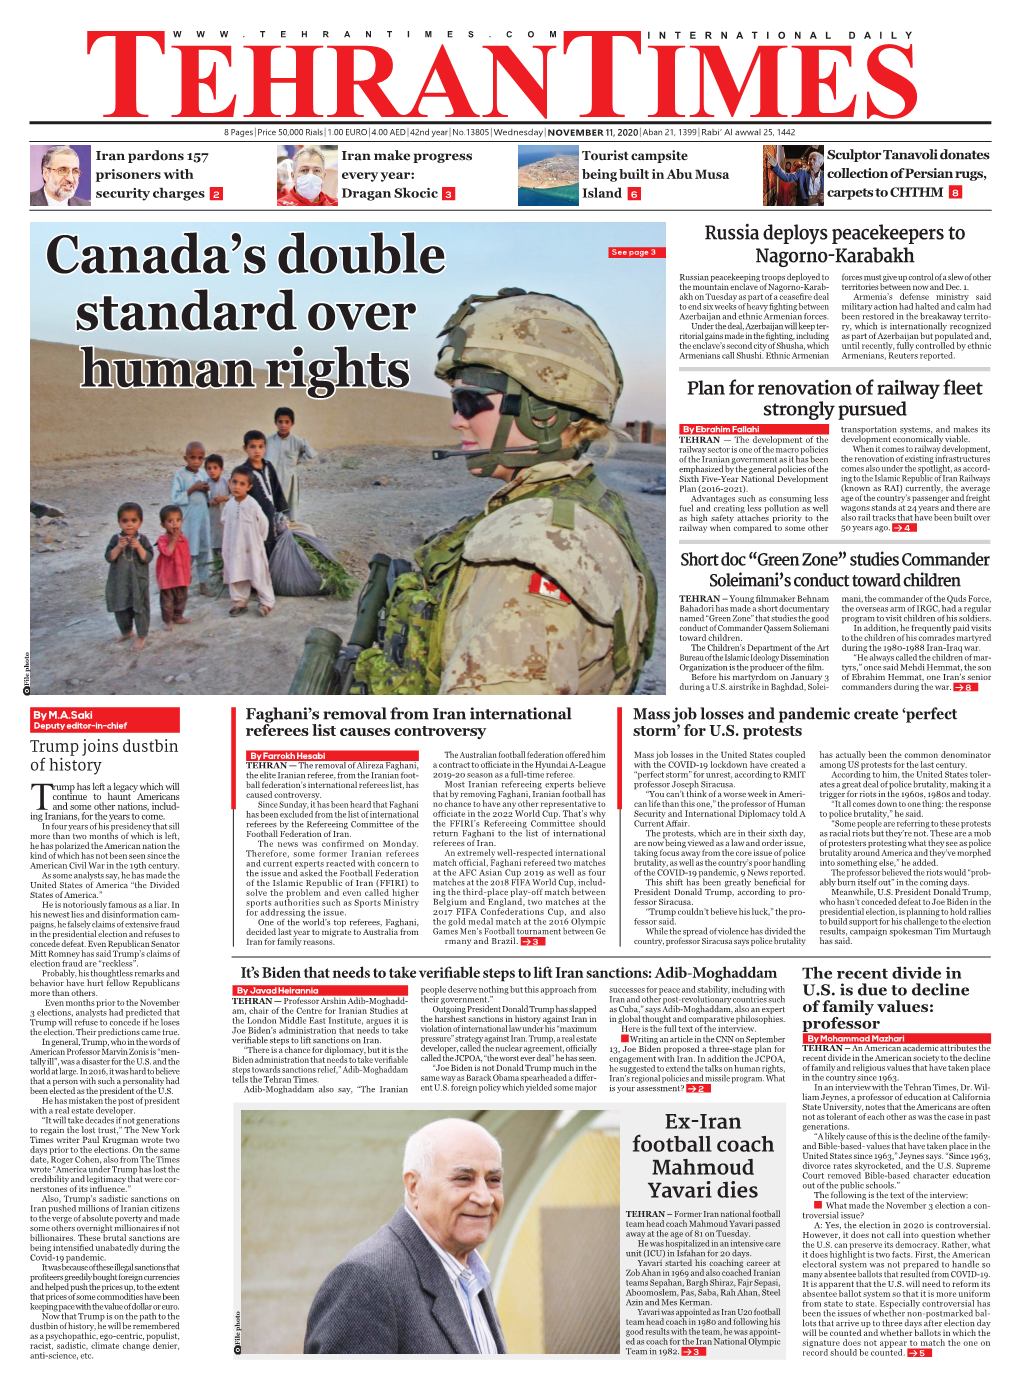 Canada's Double Standard Over Human Rights